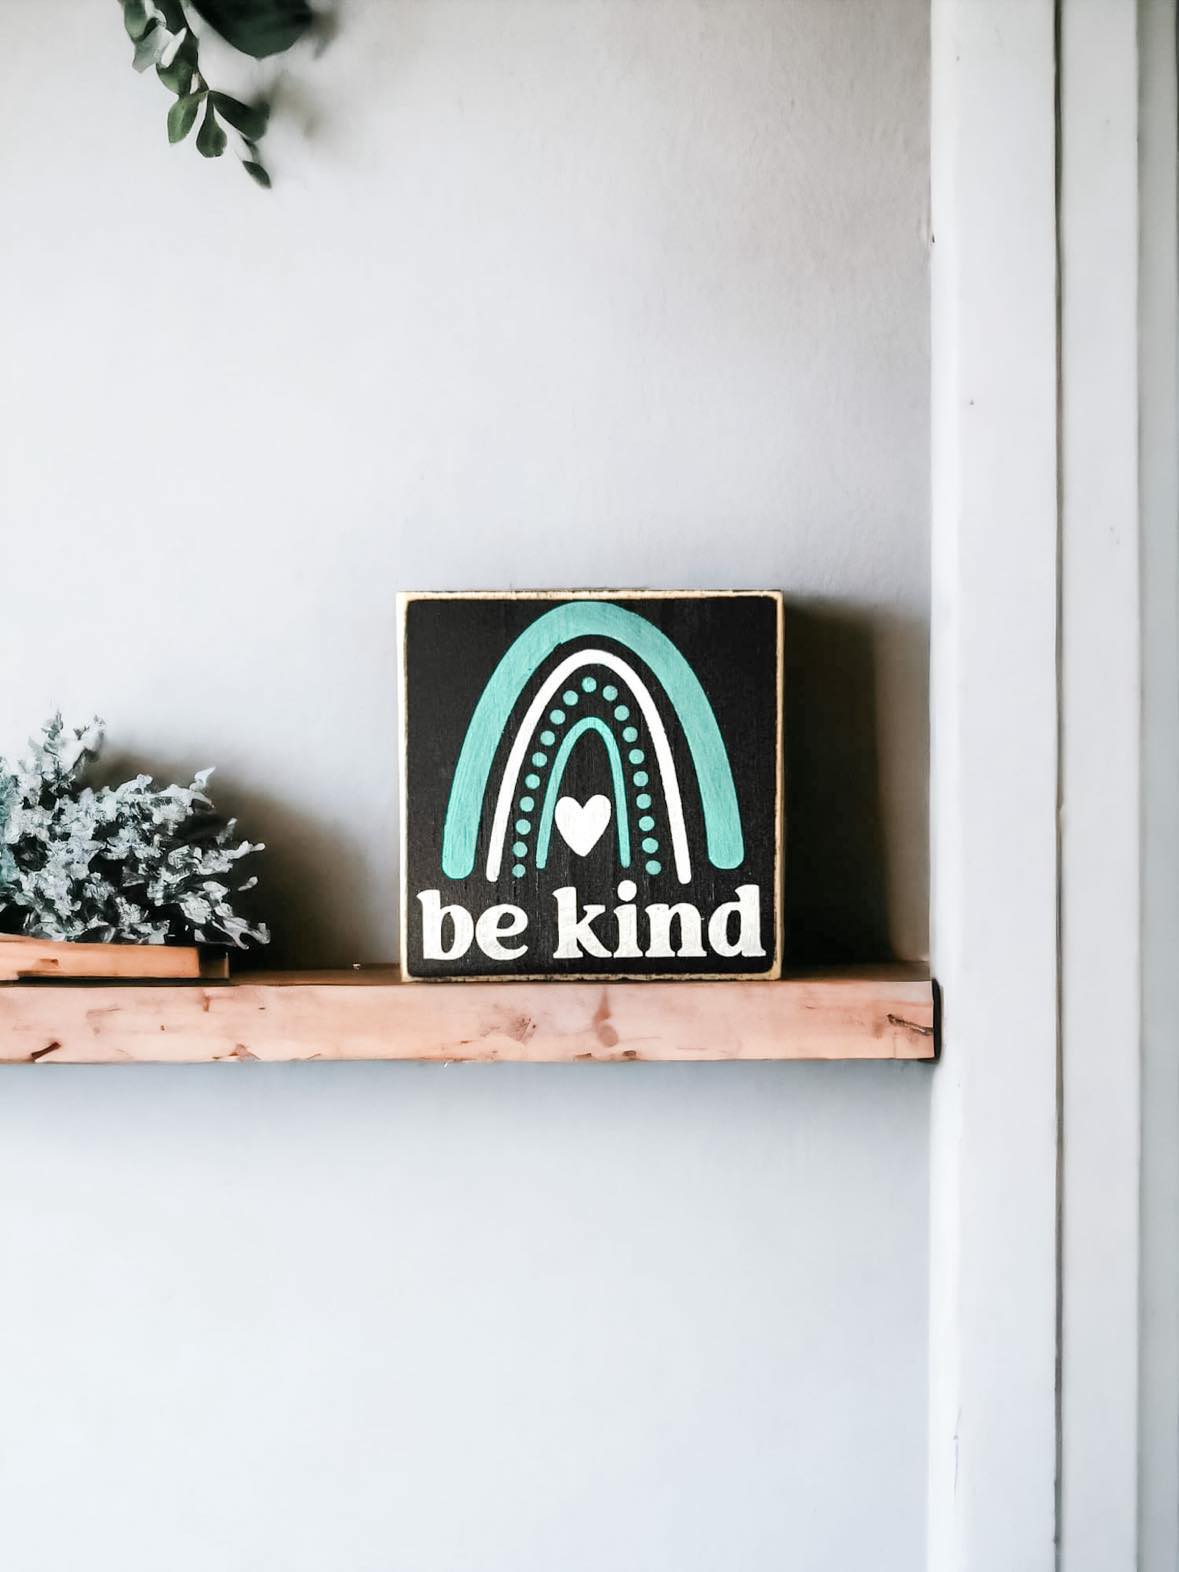 Be Kind" Wood Block Sign: Hand-painted white text on black background with rainbow accent, 4.5"x4.5". Ideal for spreading positivity.